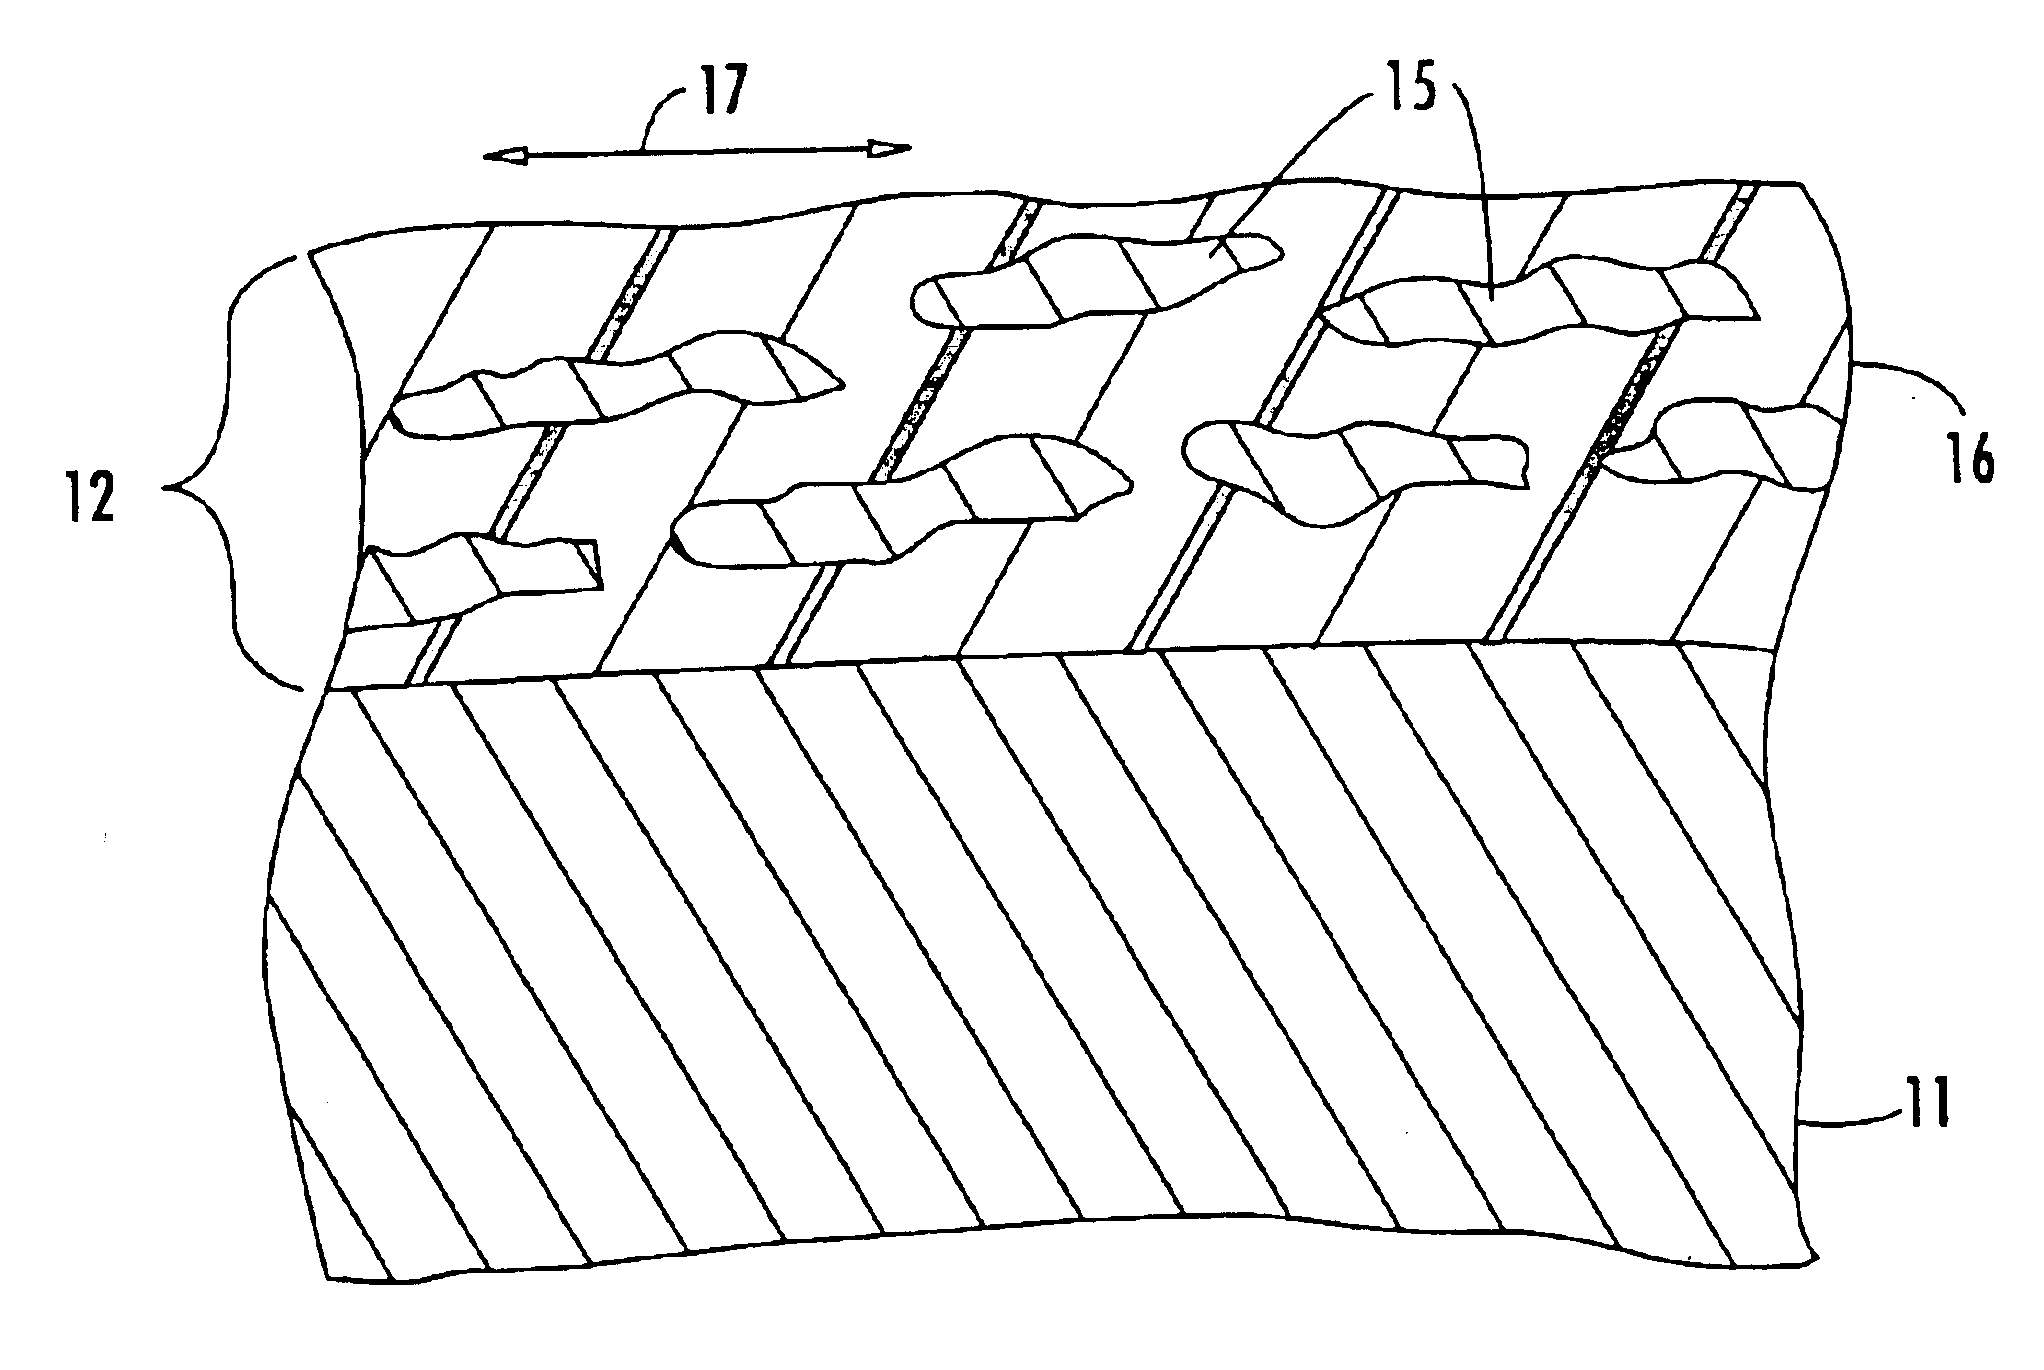 Method for making radiation absorbing material (RAM) and devices including same